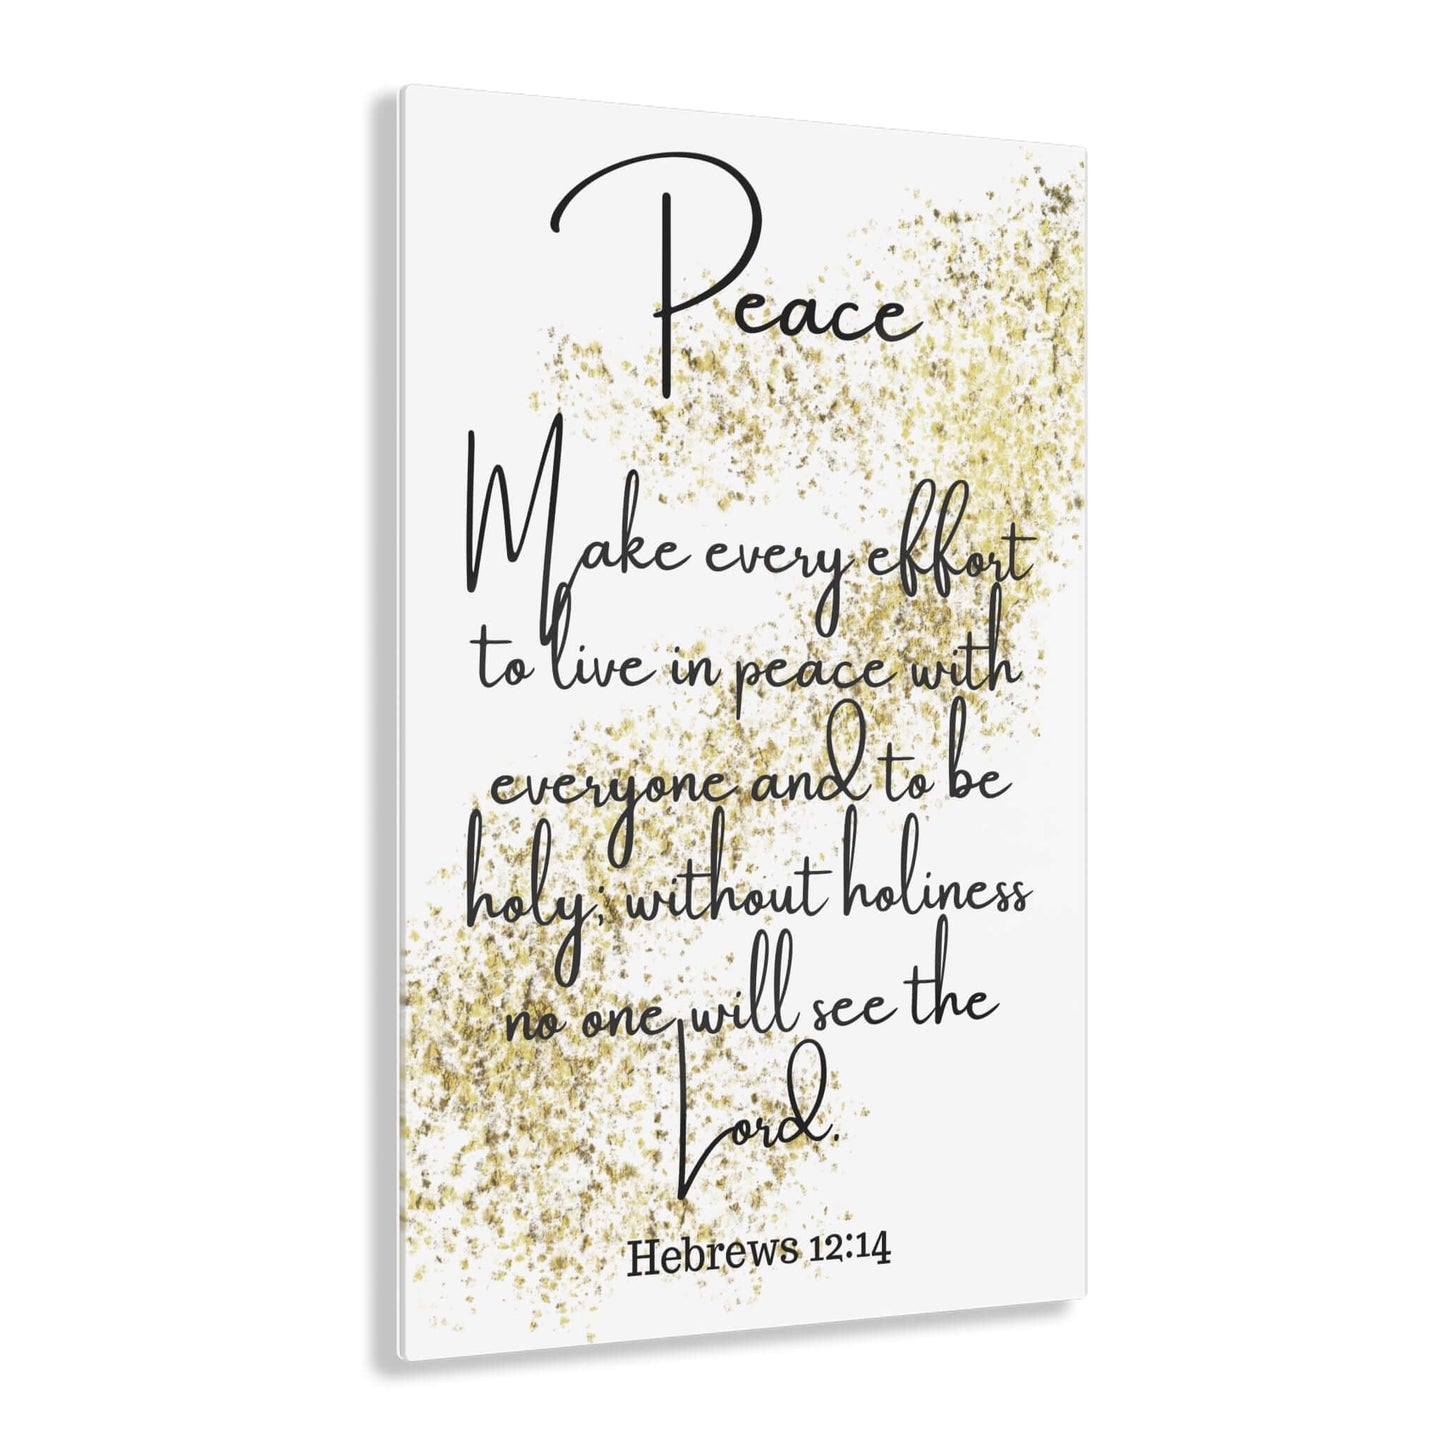 Large Christian Wall Art - Acrylic Print with Inspirational Verse | Art & Wall Decor,Assembled in the USA,Assembled in USA,Decor,Home & Living,Home Decor,Indoor,Made in the USA,Made in USA,Poster